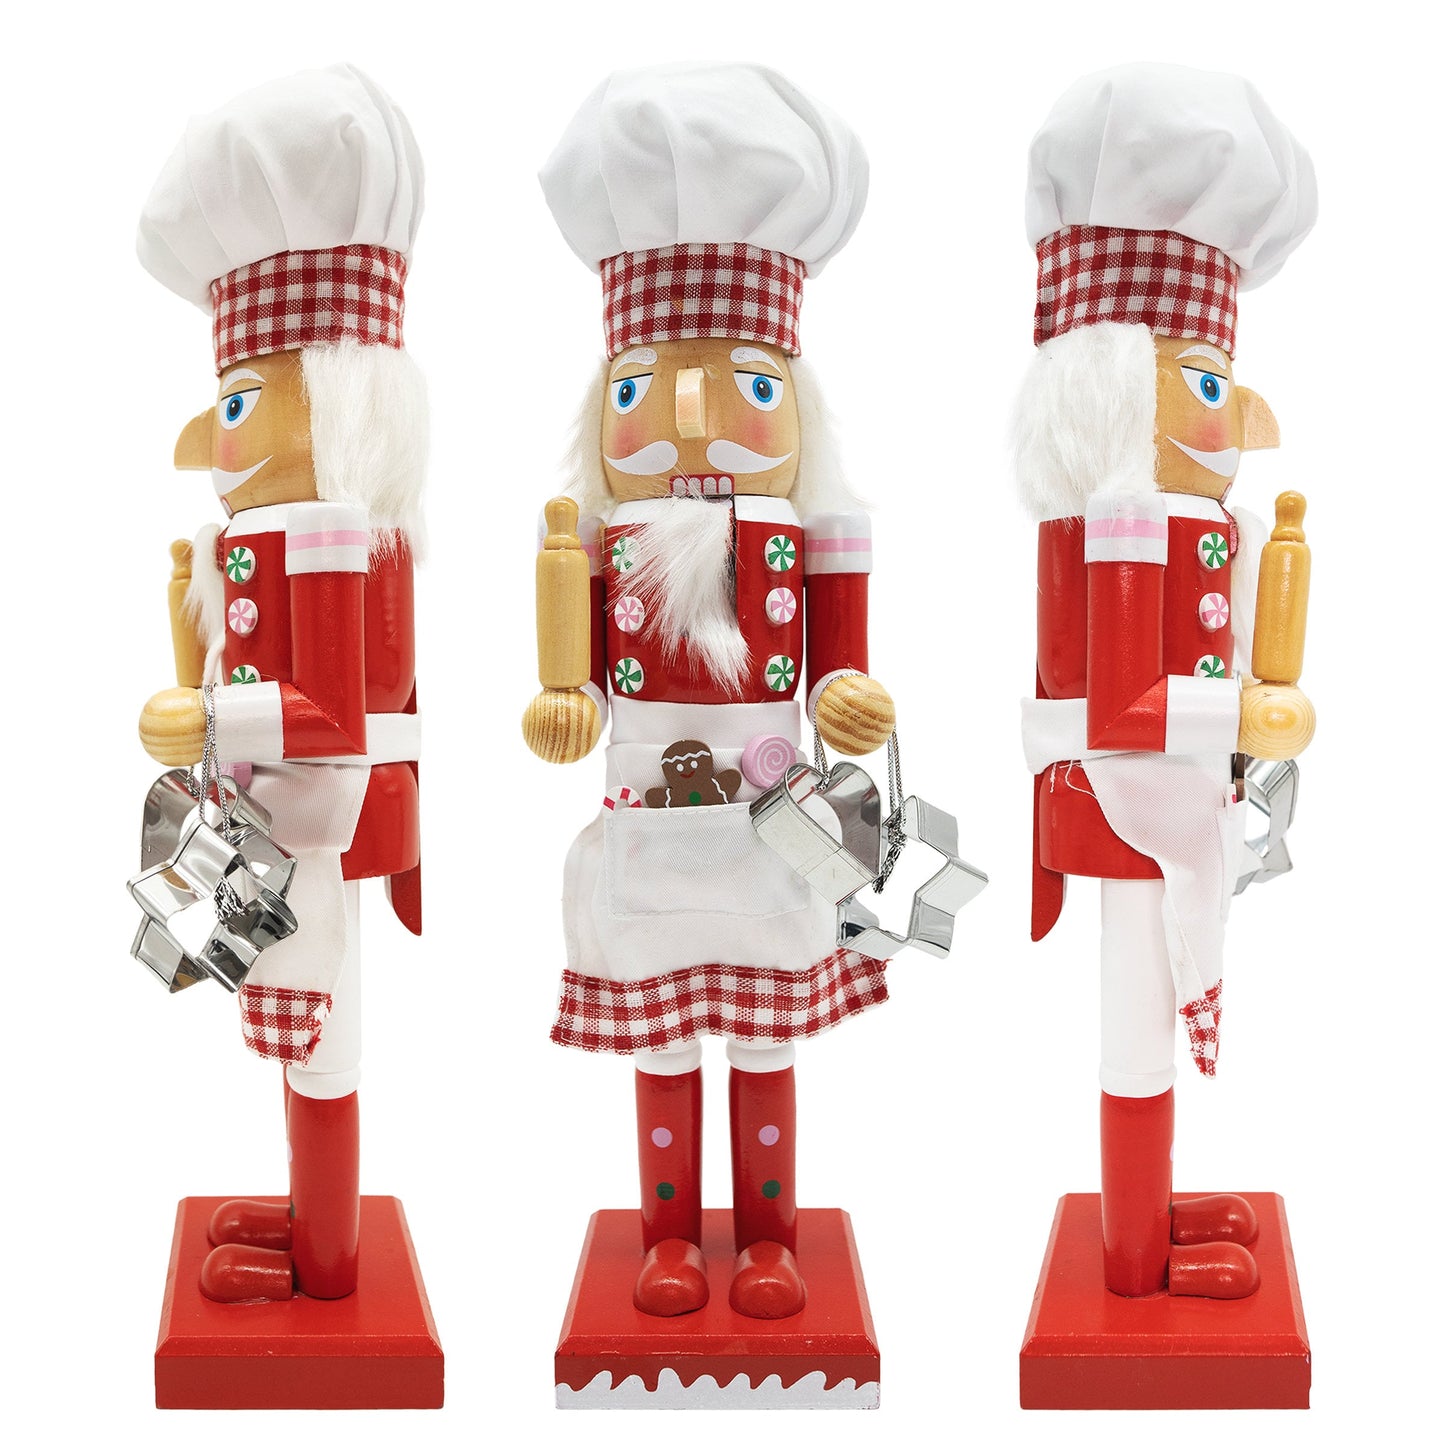 14-inch Wooden Nutcracker Christmas Decoration | Red-Baker Chef Figure | Holiday Decor